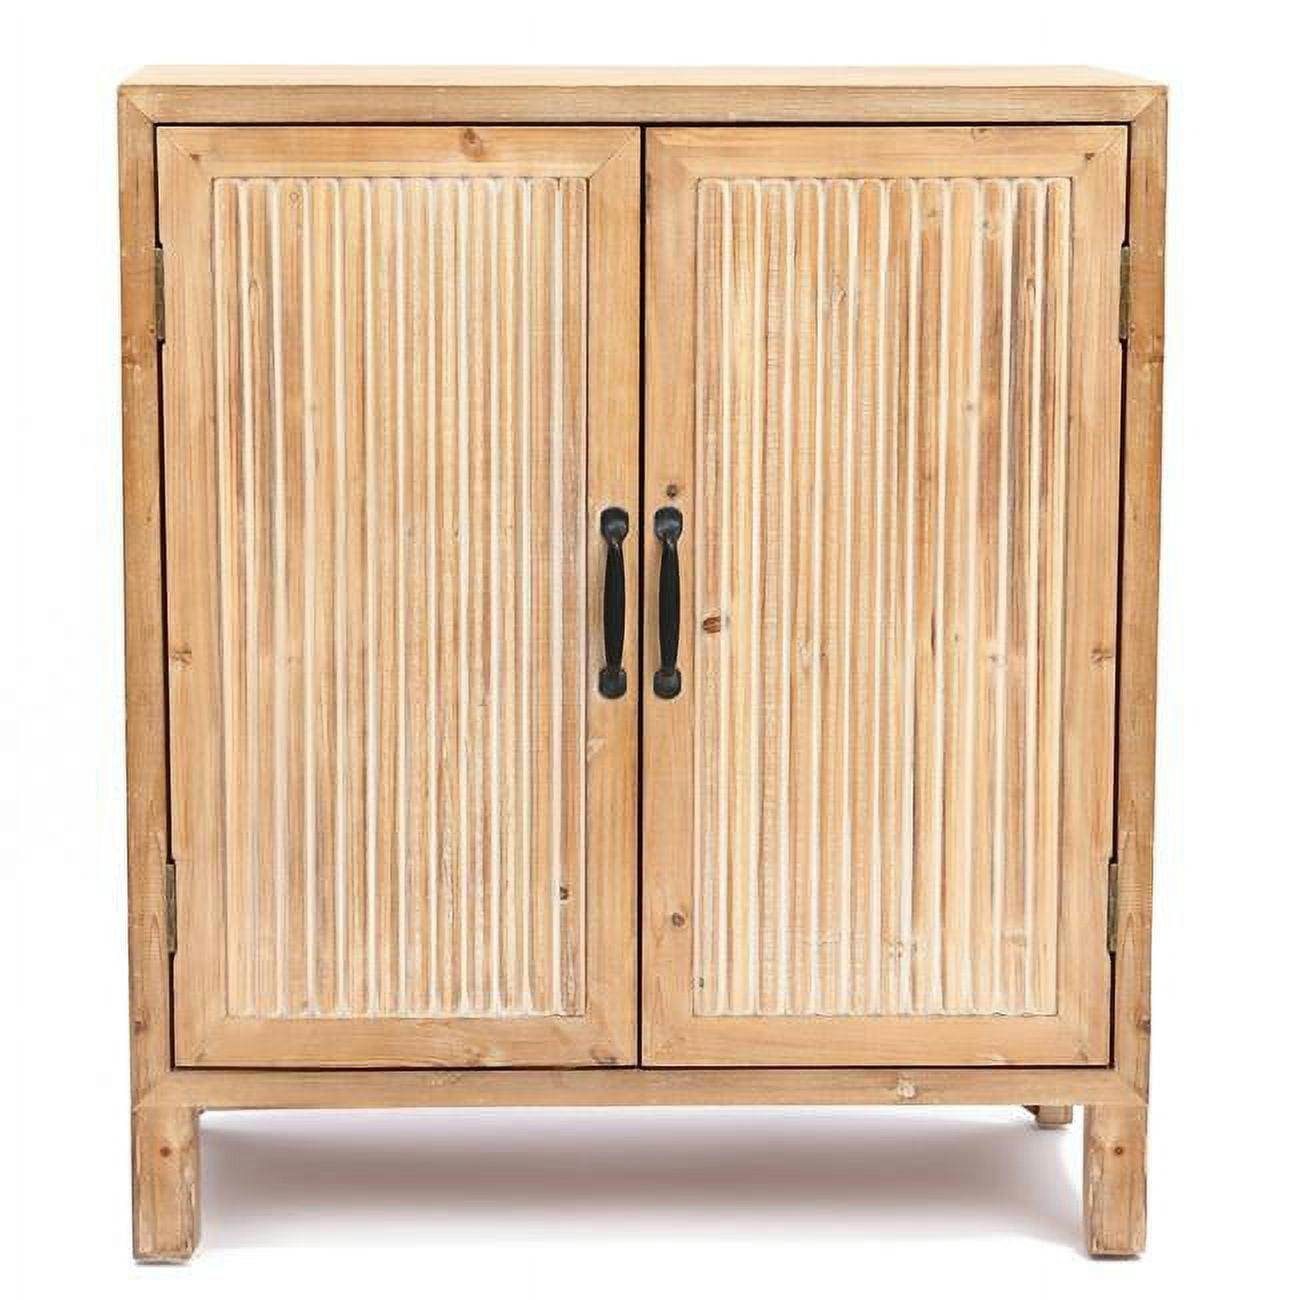 Rustic Fir and Manufactured Wood 2-Door Storage Cabinet